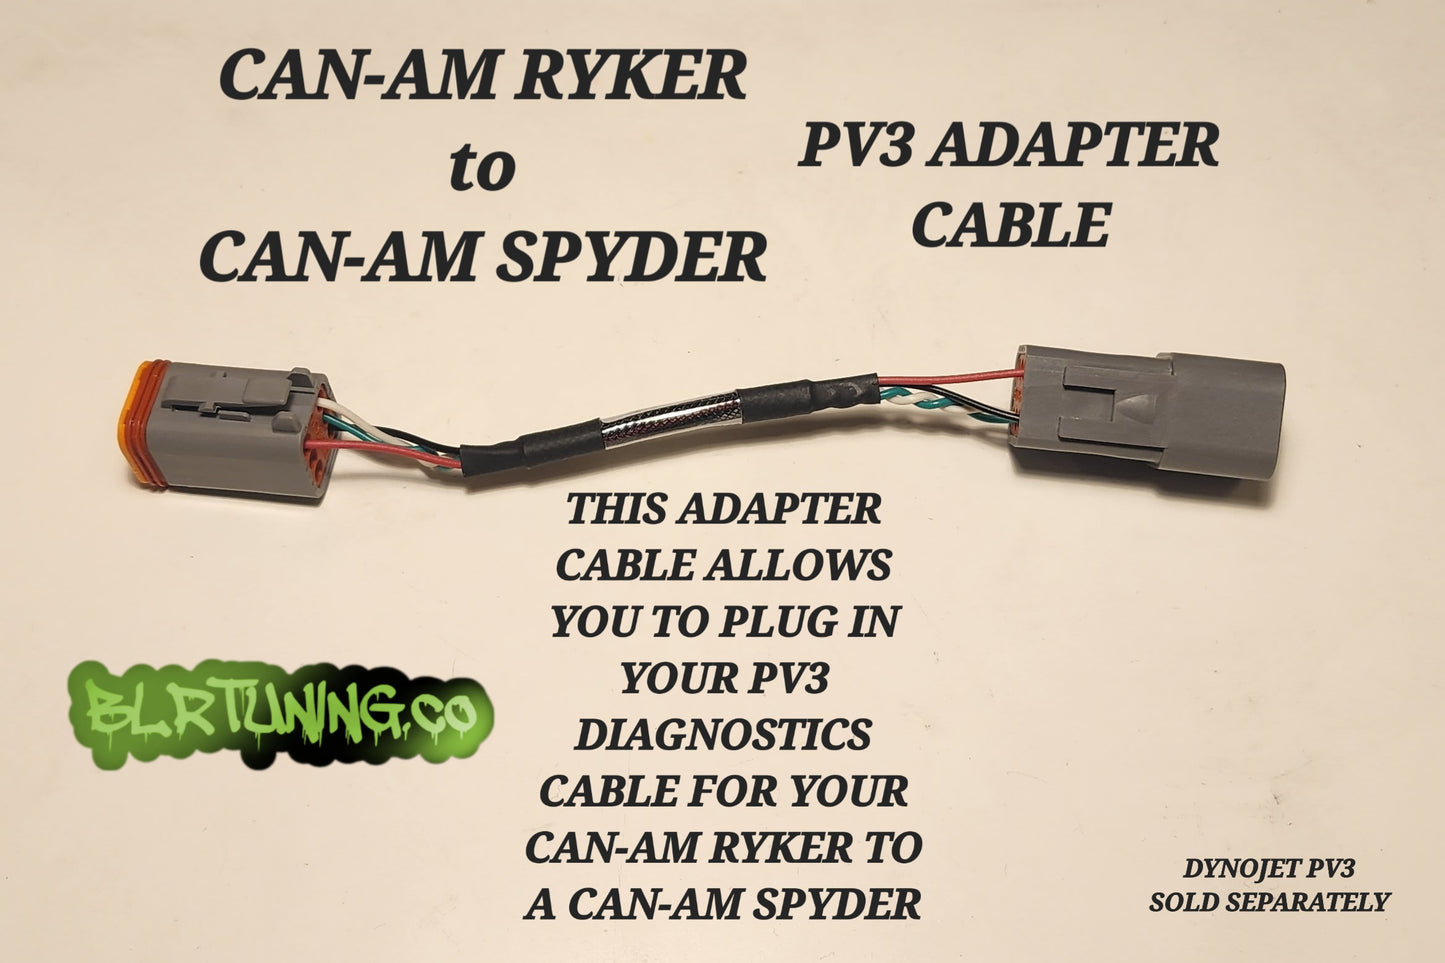 CABLE ADAPTADOR CAN-AM RYKER PV3 A CAN-AM SPYDER